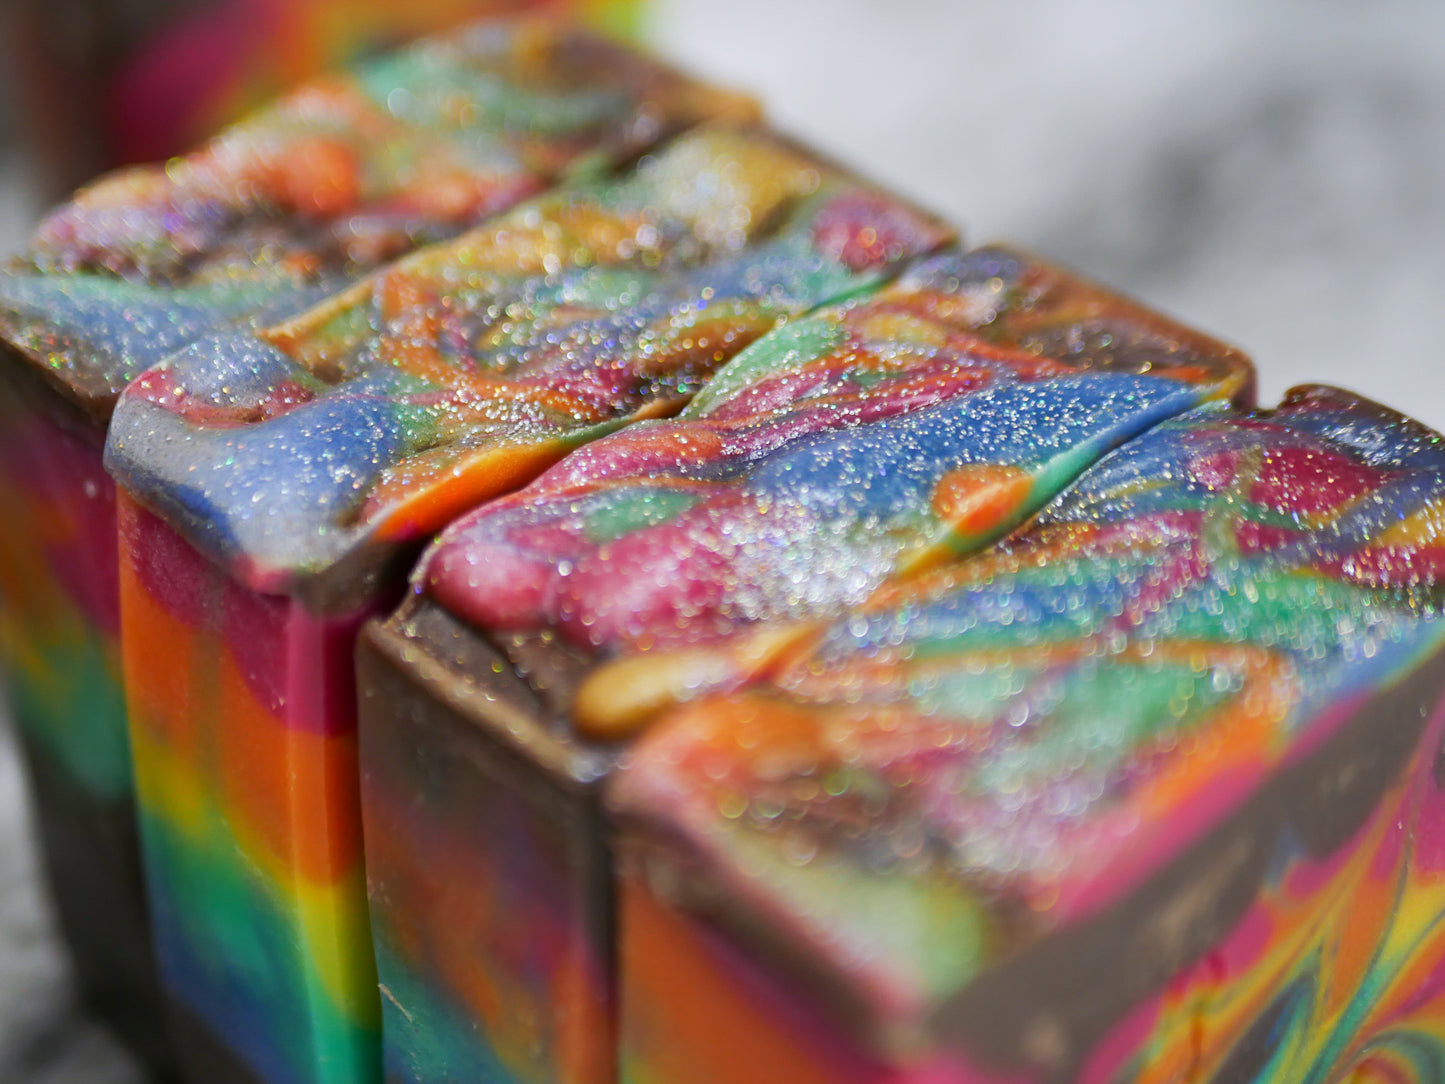 Handcrafted Bar Soap - Cosmic Brownie